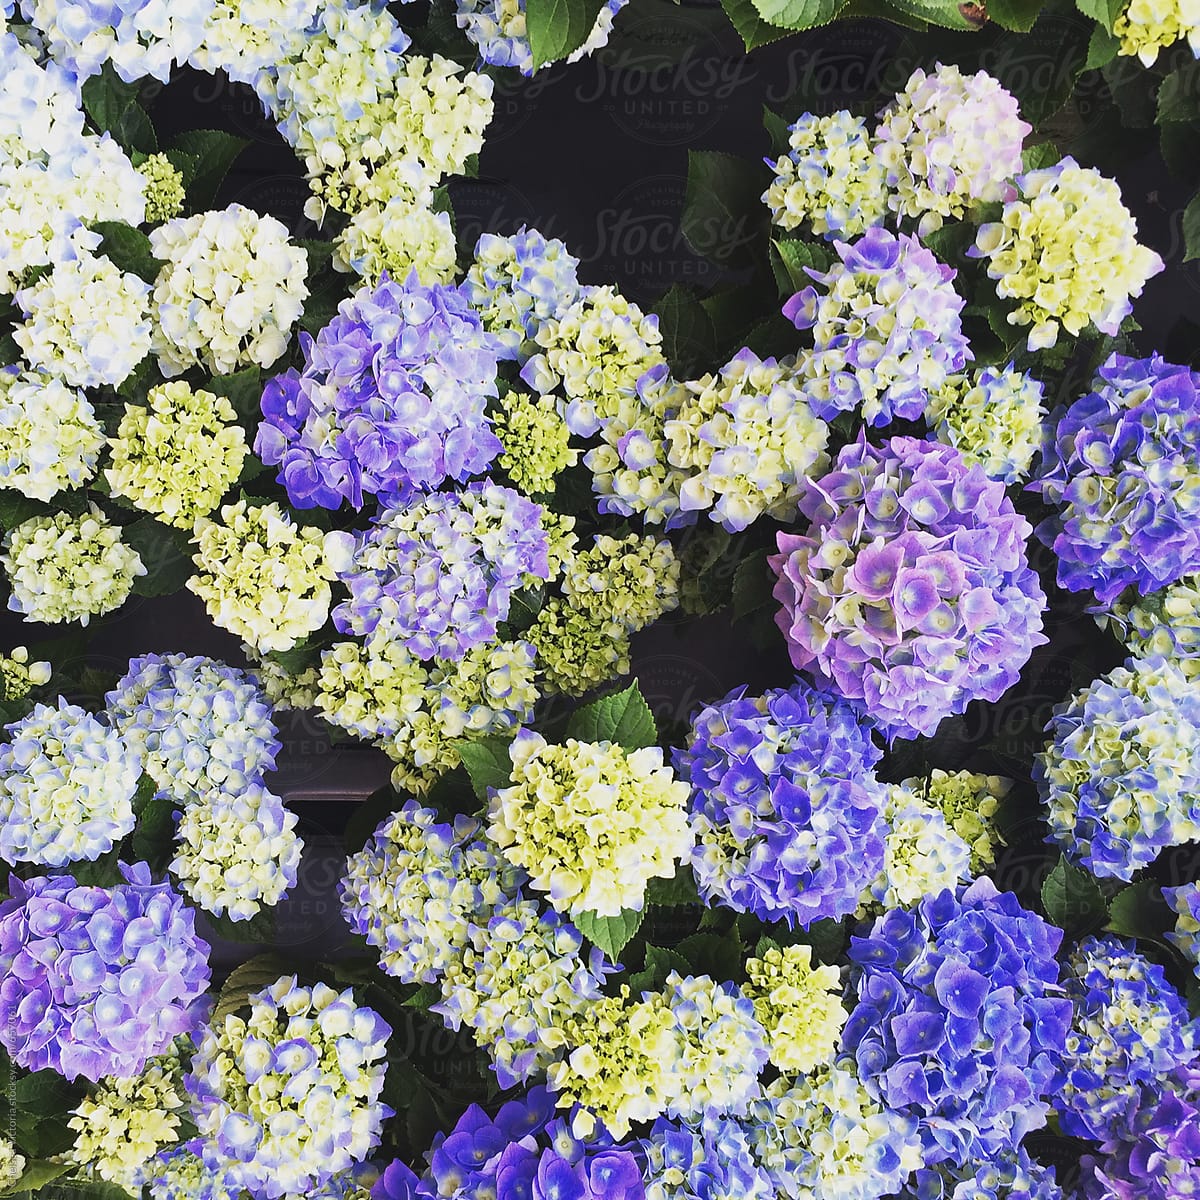 Blue and yellow hydrangeas at a flower market